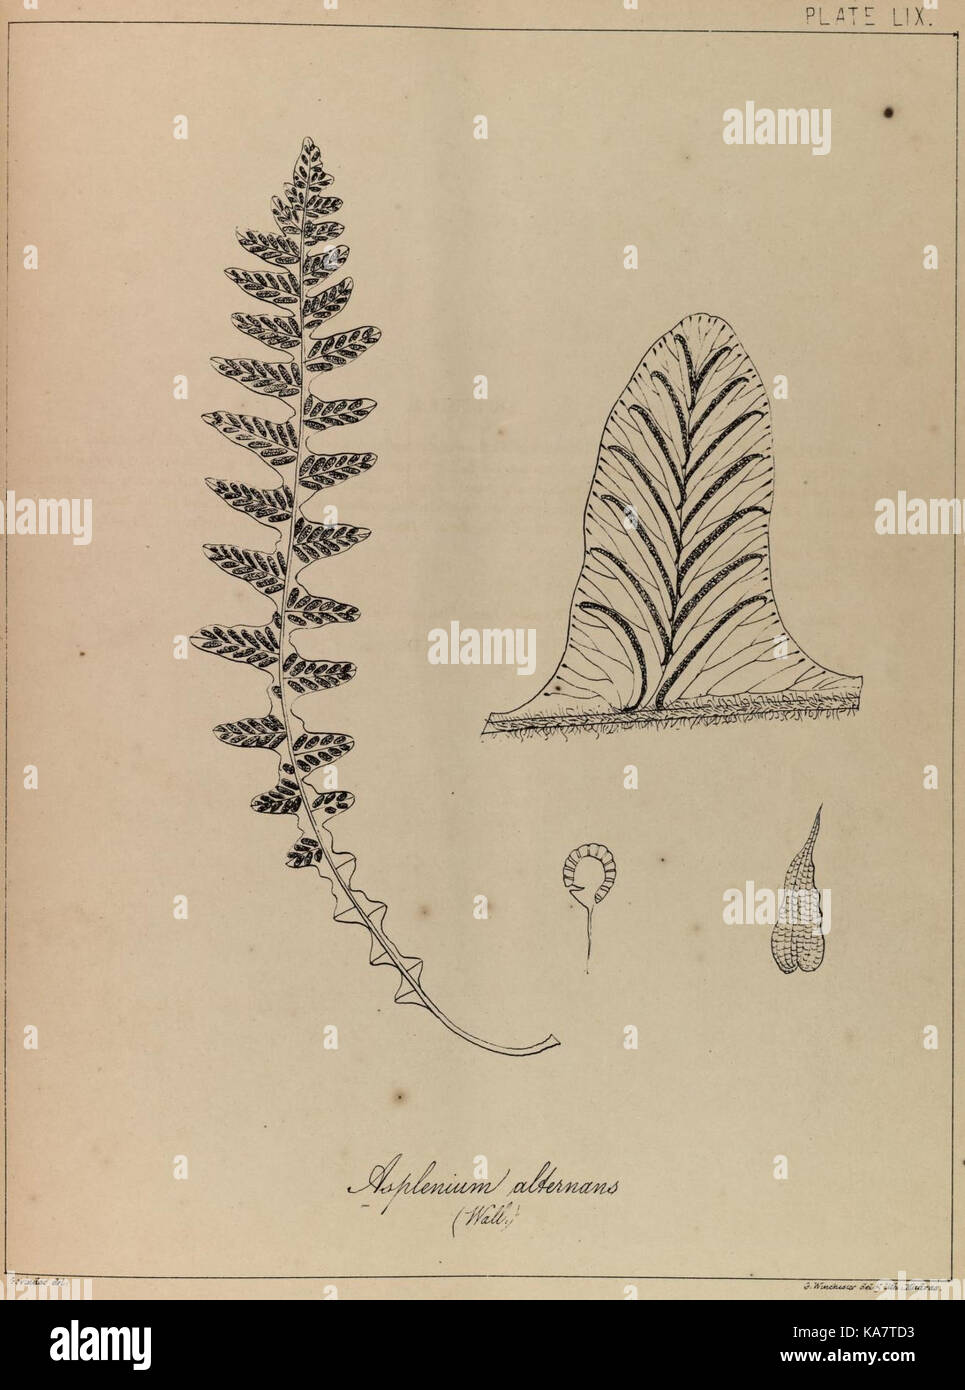 The ferns of British India (PLATE LIX) (8530293043) Stock Photo